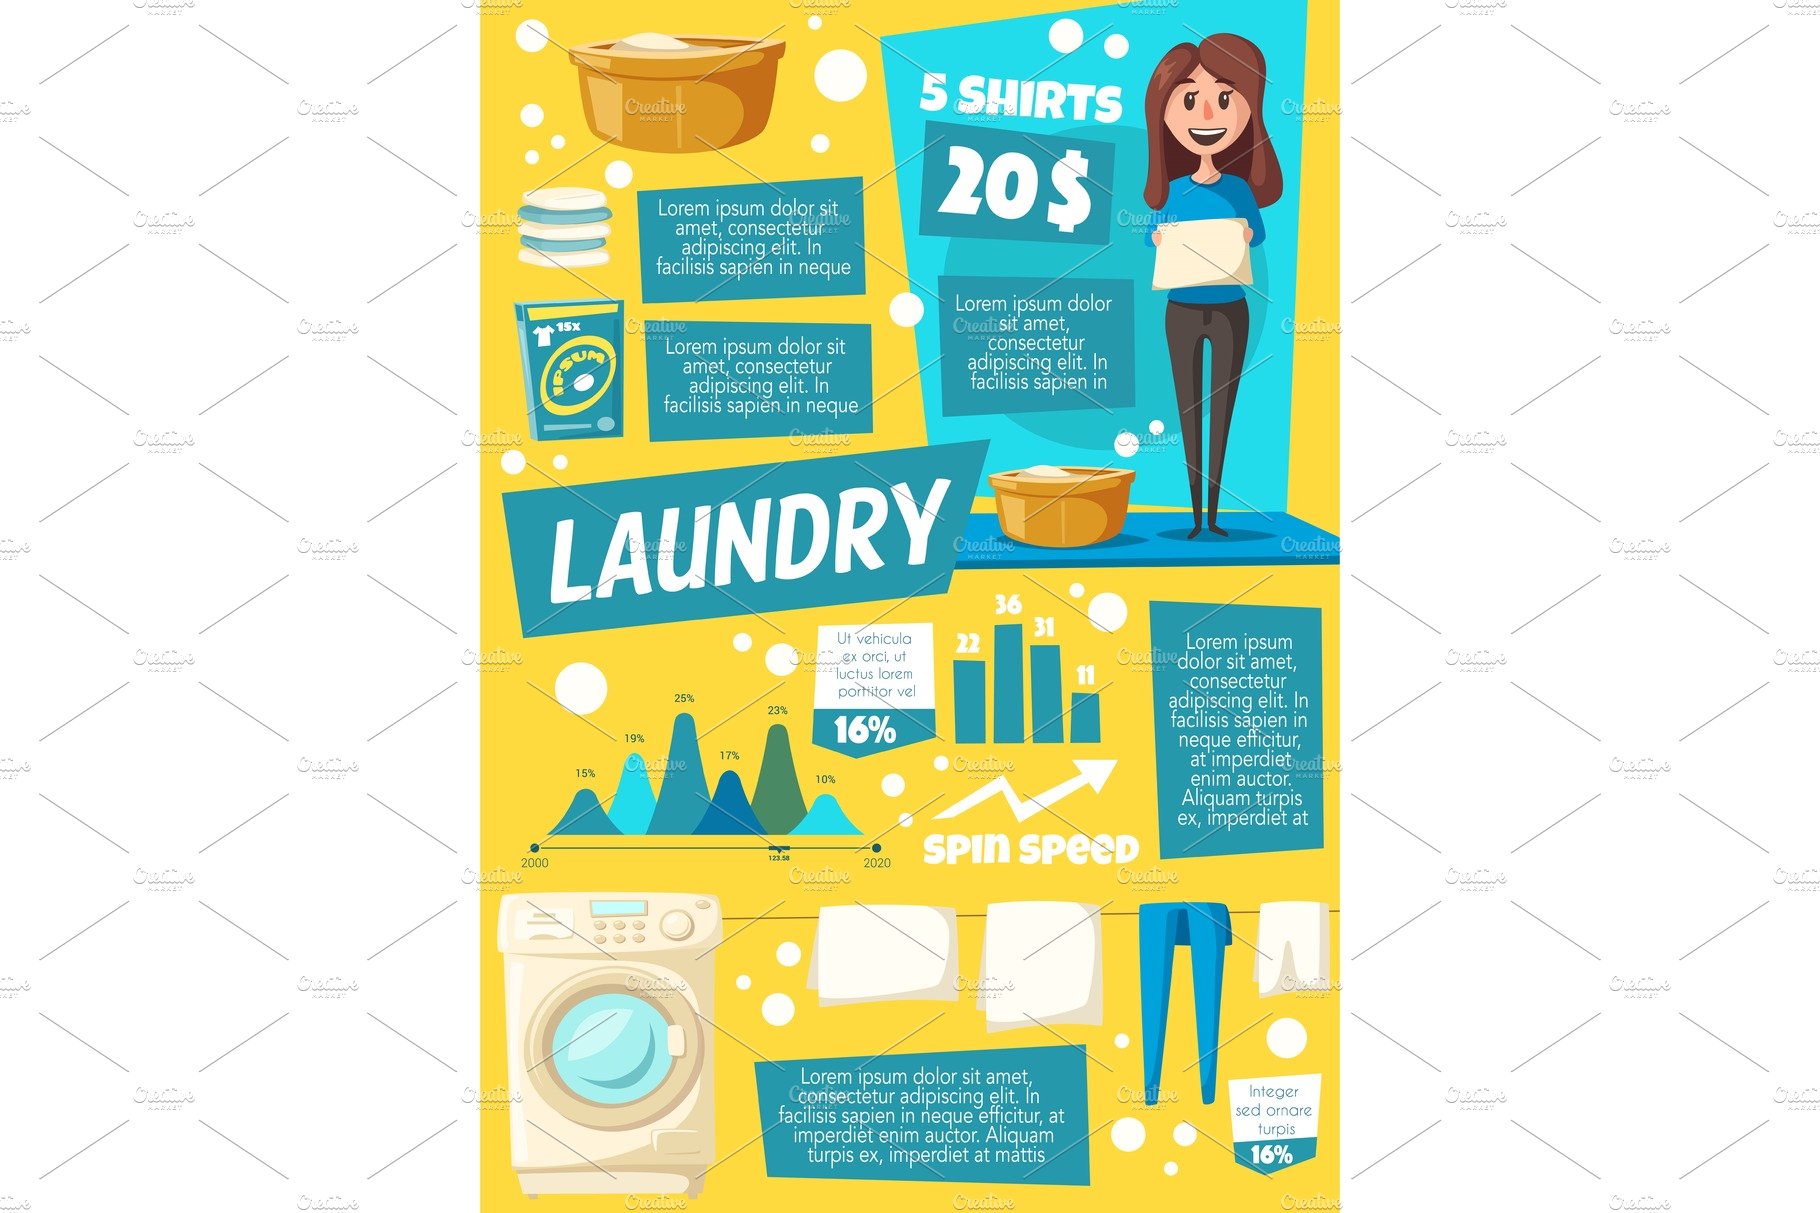 Washing, housekeeping and laundry cover image.